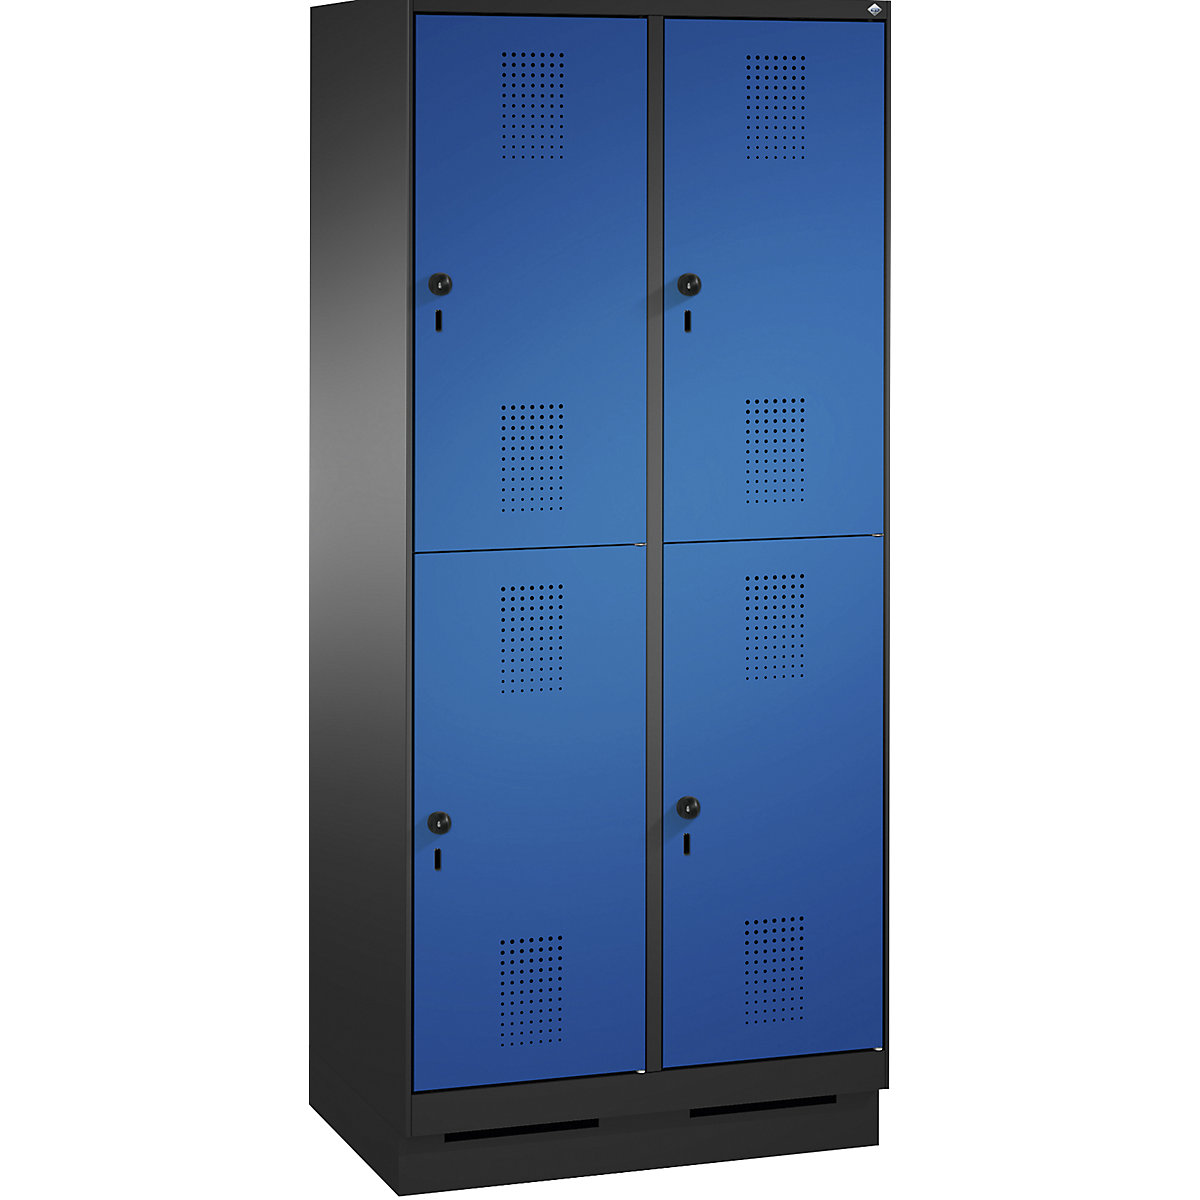 EVOLO cloakroom locker, double tier, with plinth – C+P, 2 compartments, 2 shelf compartments each, compartment width 400 mm, black grey / gentian blue-17